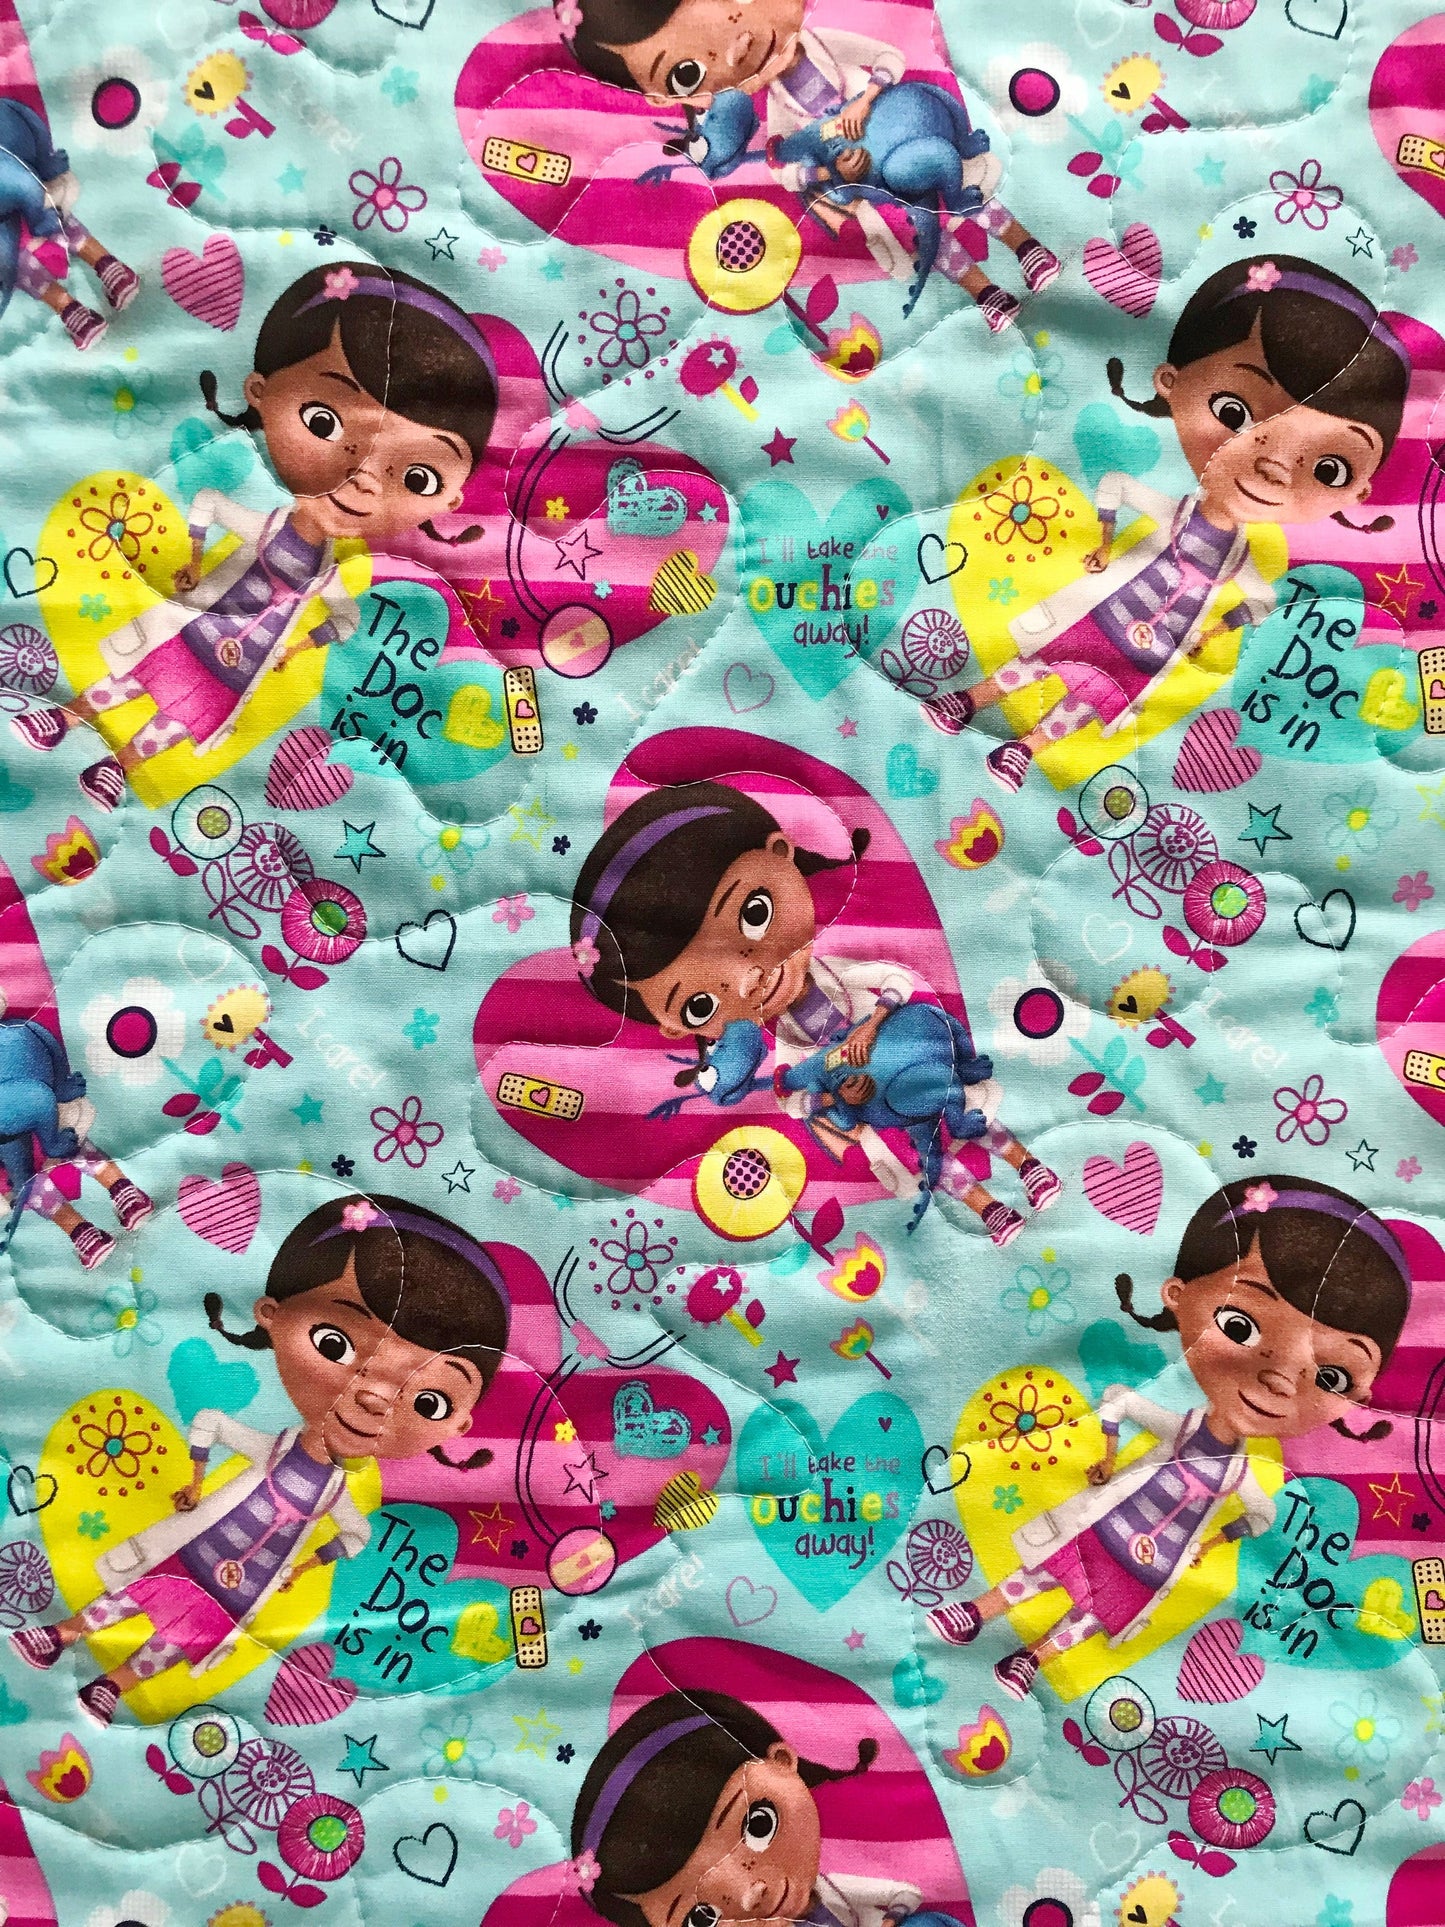 Doc McStuffins inspired Love You More Quilted Blanket